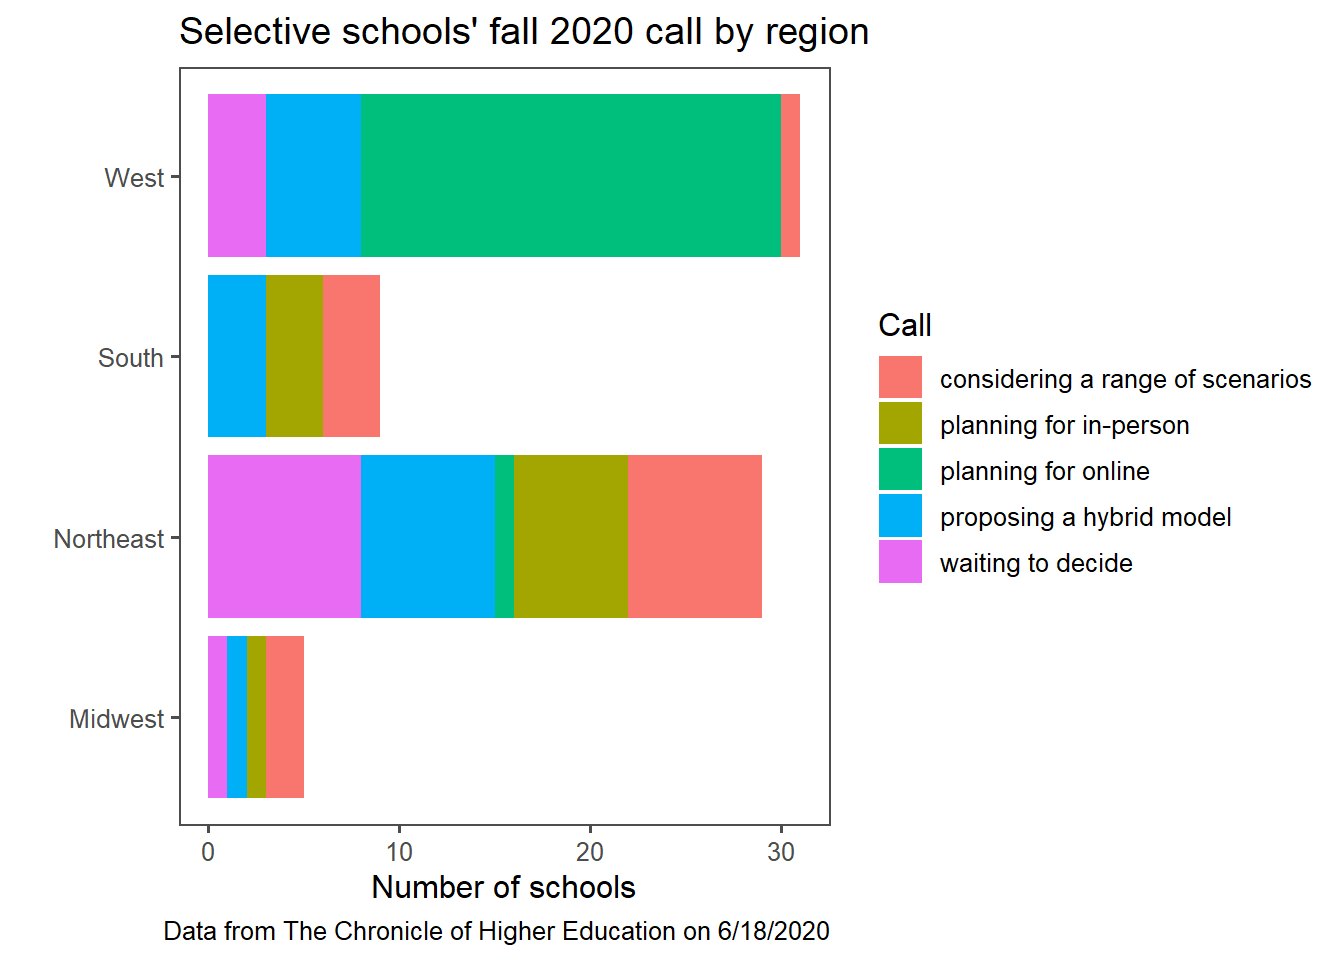 Caption: Selective school's fall descision broken down by four geographic regions